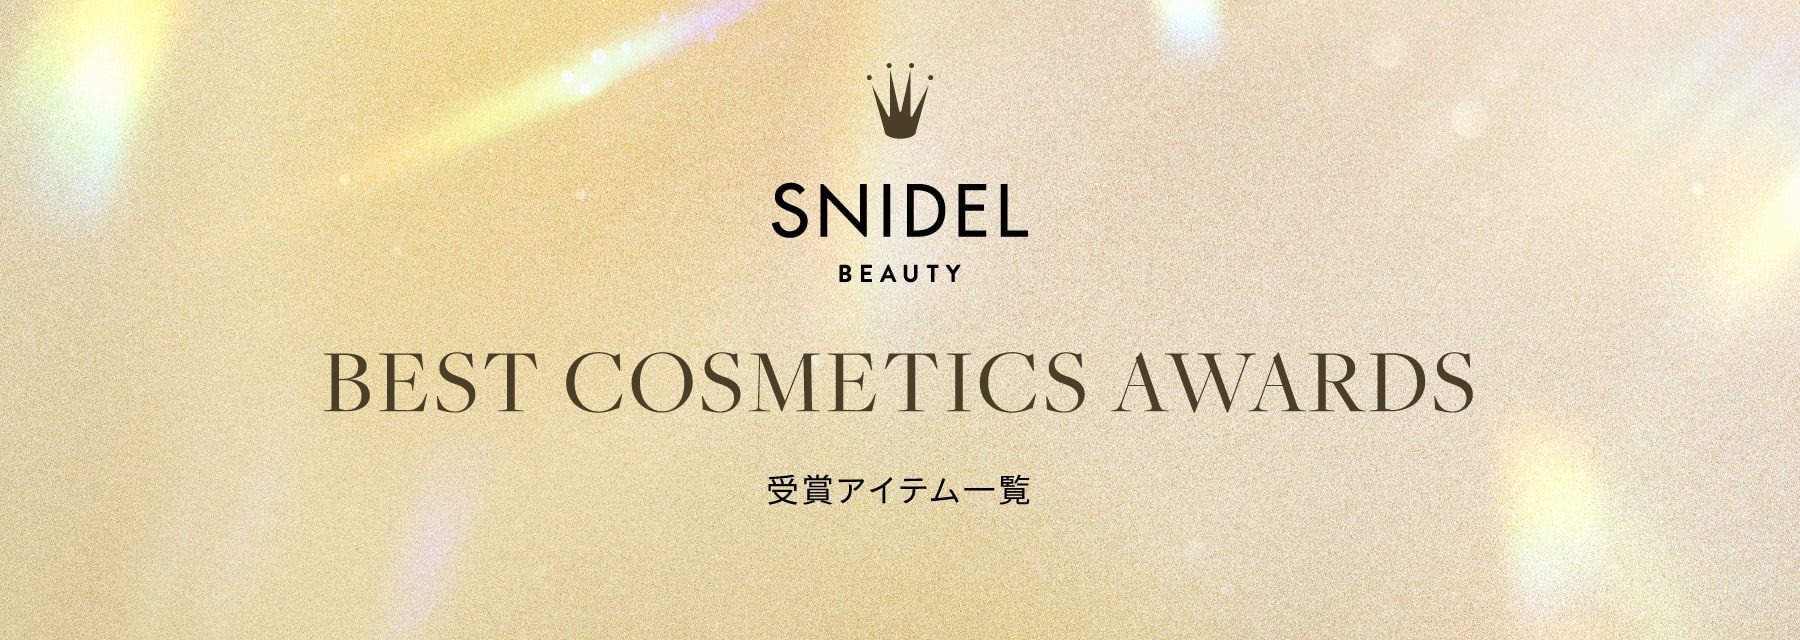 SNIDEL BEAUTY BEST COSMETICS AWARDS 受賞アイテム一覧